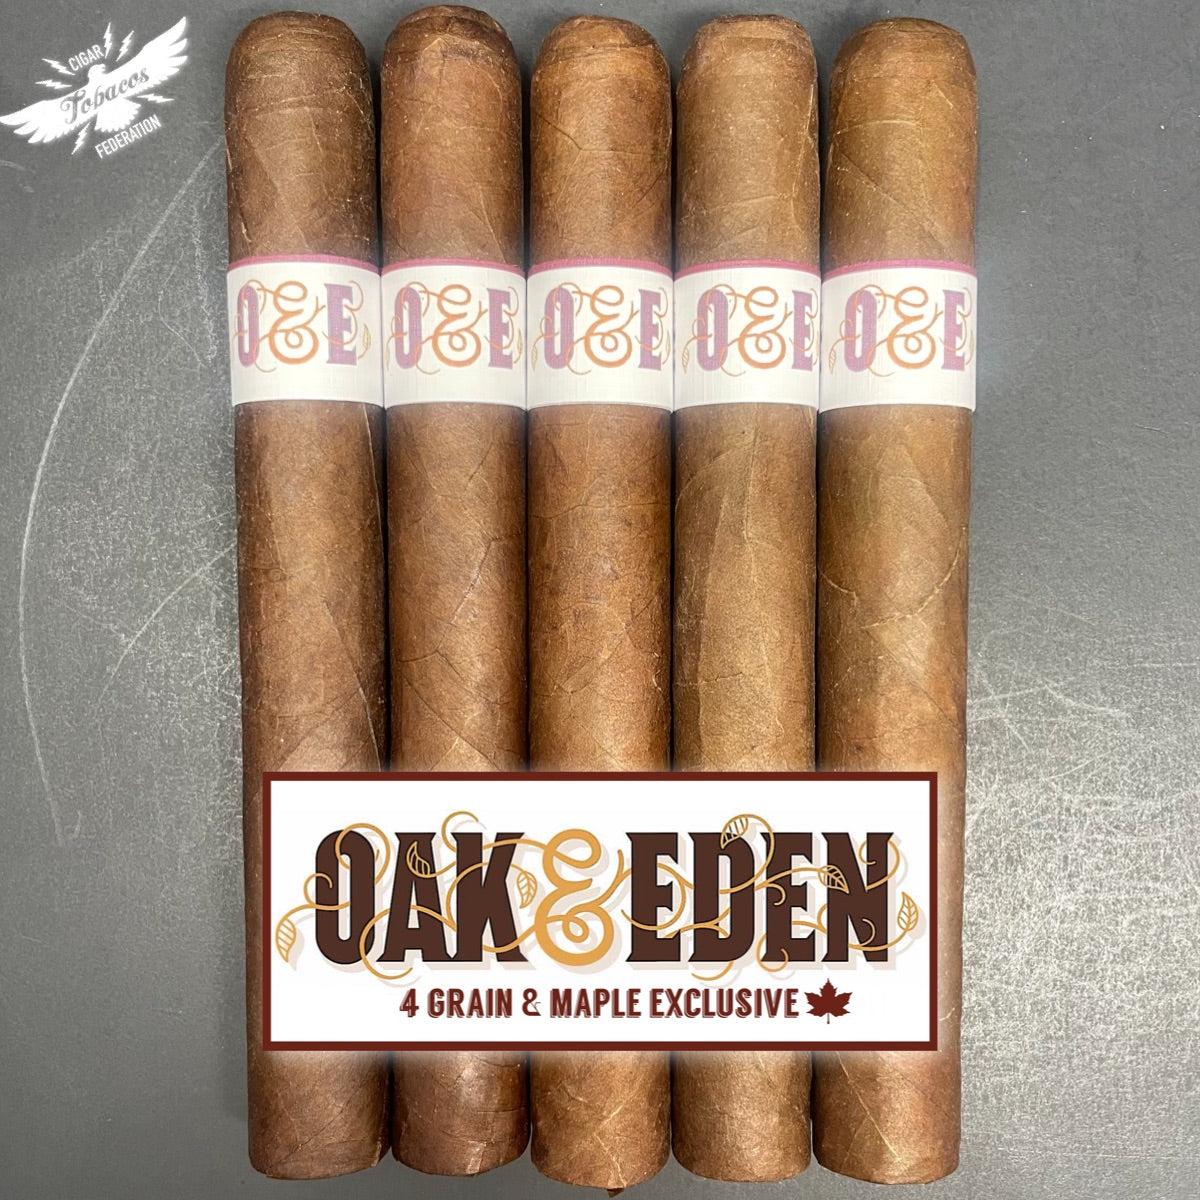 Gold Flake cigarettes at best price – Eden The Store